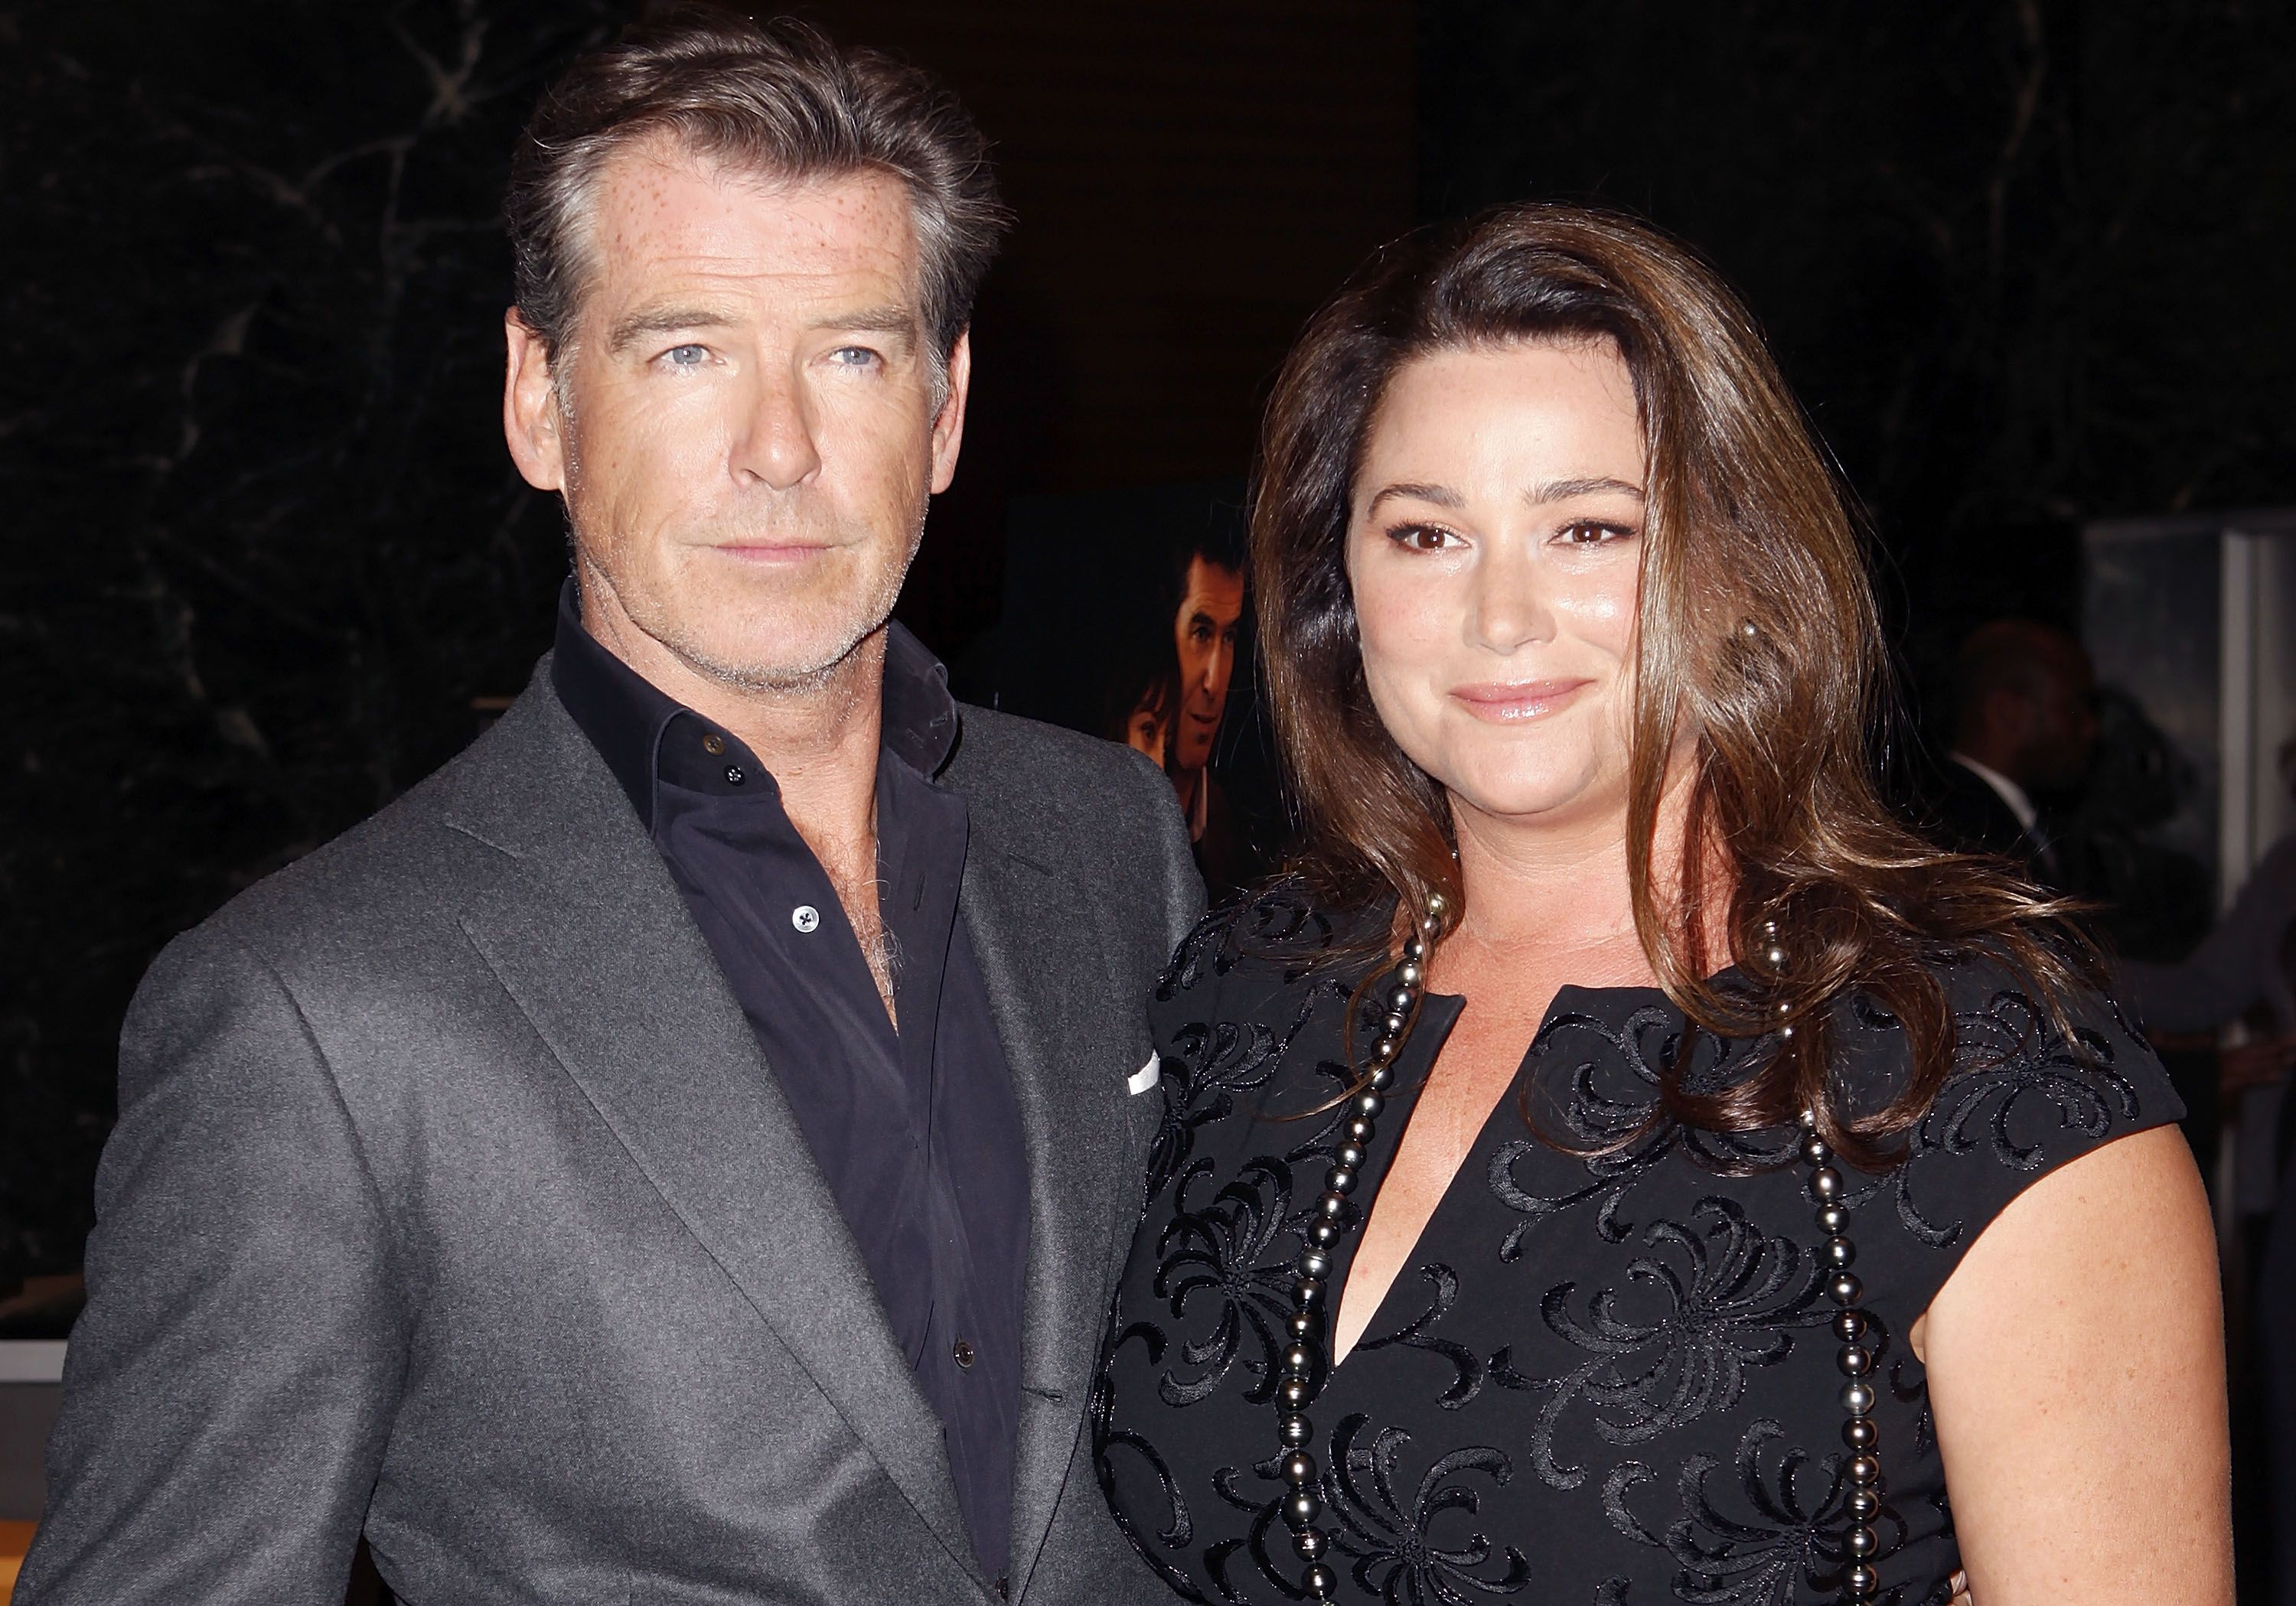 Pierce Brosnan and Keely Shaye Brosnan during the Los Angeles premiere of "The Greatest" at Linwood Dunn Theater at the Pickford Center for Motion Study on March 25, 2010, in Hollywood, California. | Source: Getty Images